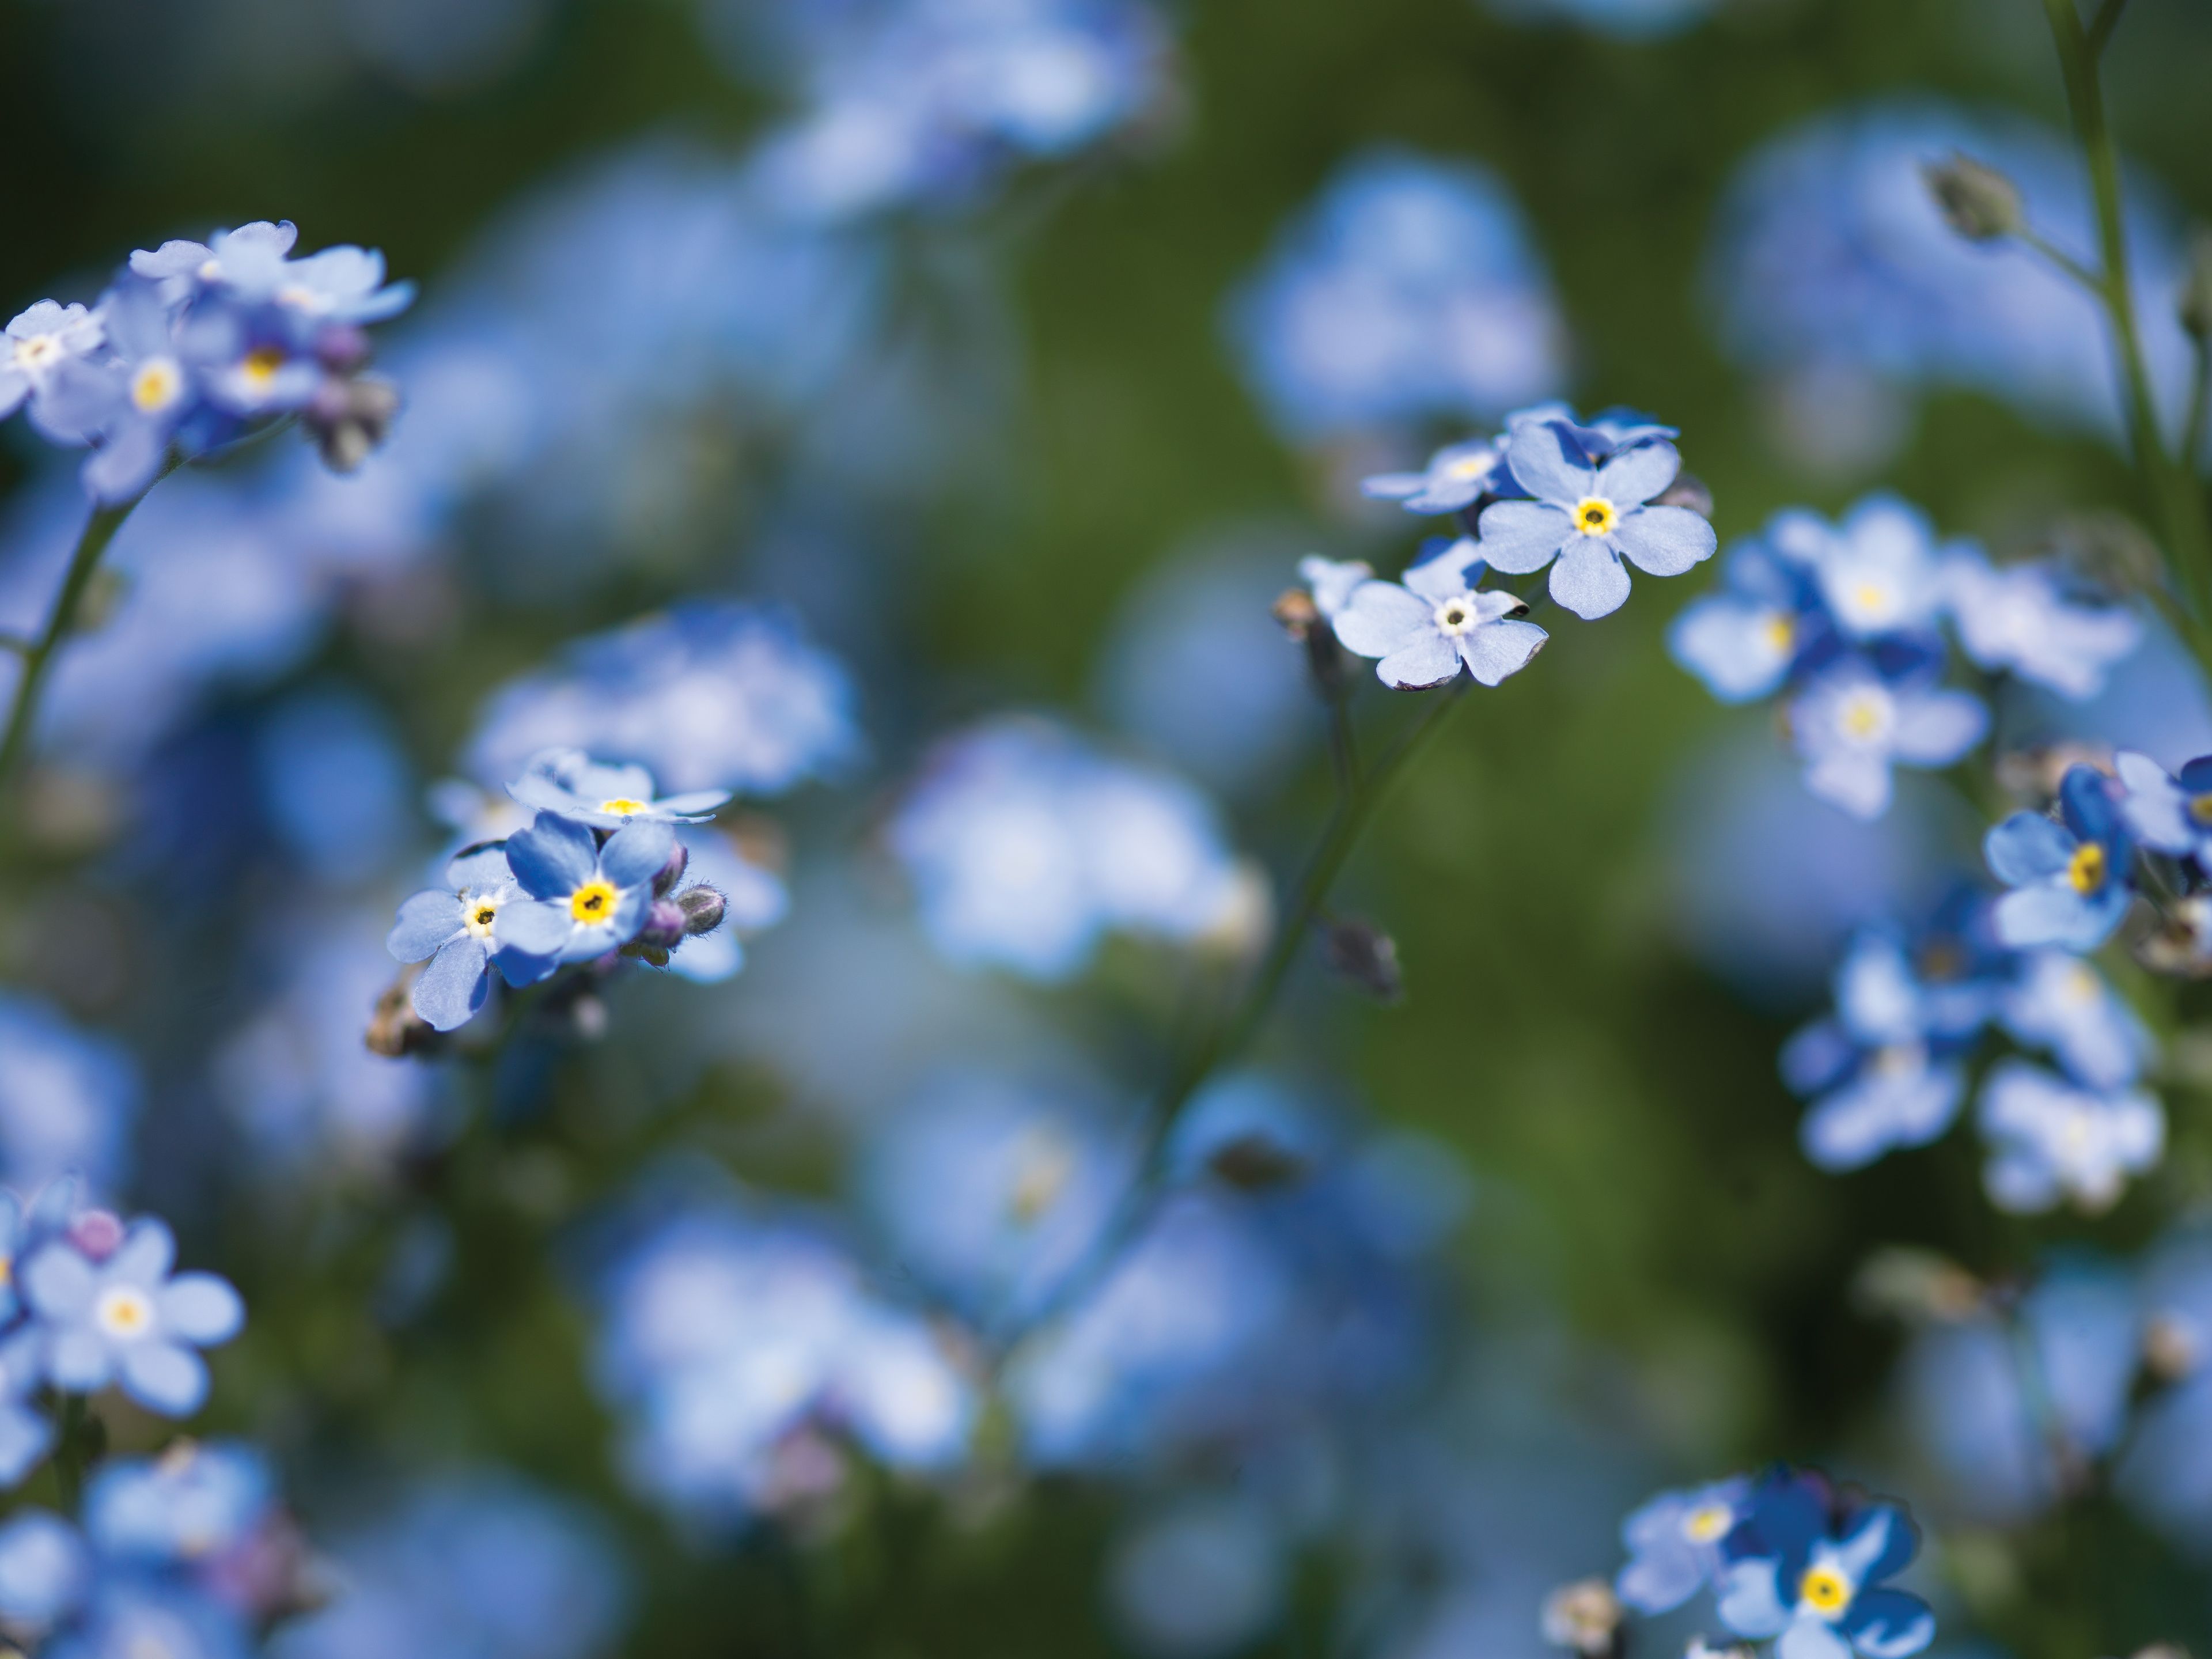 Forget-me-not flowers with blue petals.